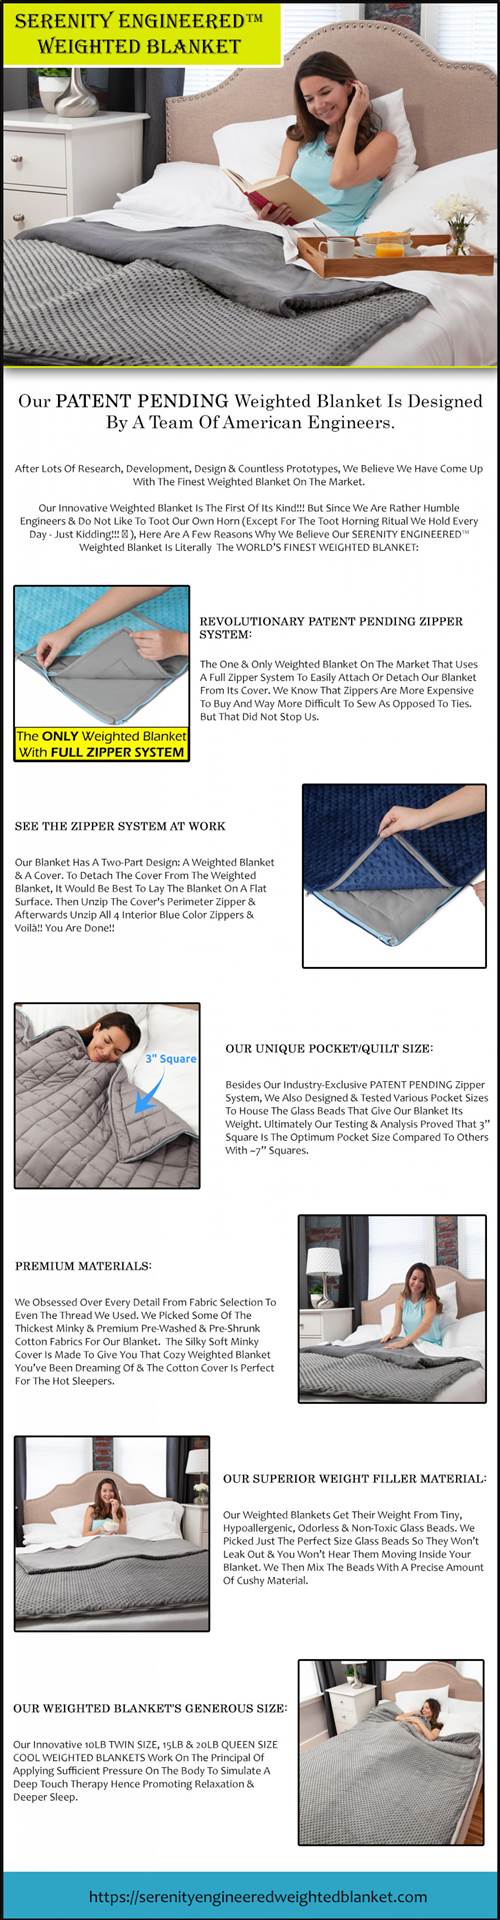 Our PATENT PENDING Weighted Blanket Is Designed By A Team Of American Engineers..jpg Serenity Engineered™ Weighted Blanket offers weighted blankets for adults & kids to help with stress, autism, sensory disorder, anxiety. For mroe info at https://serenityengineeredweightedblanket.com/ by serenityengineered